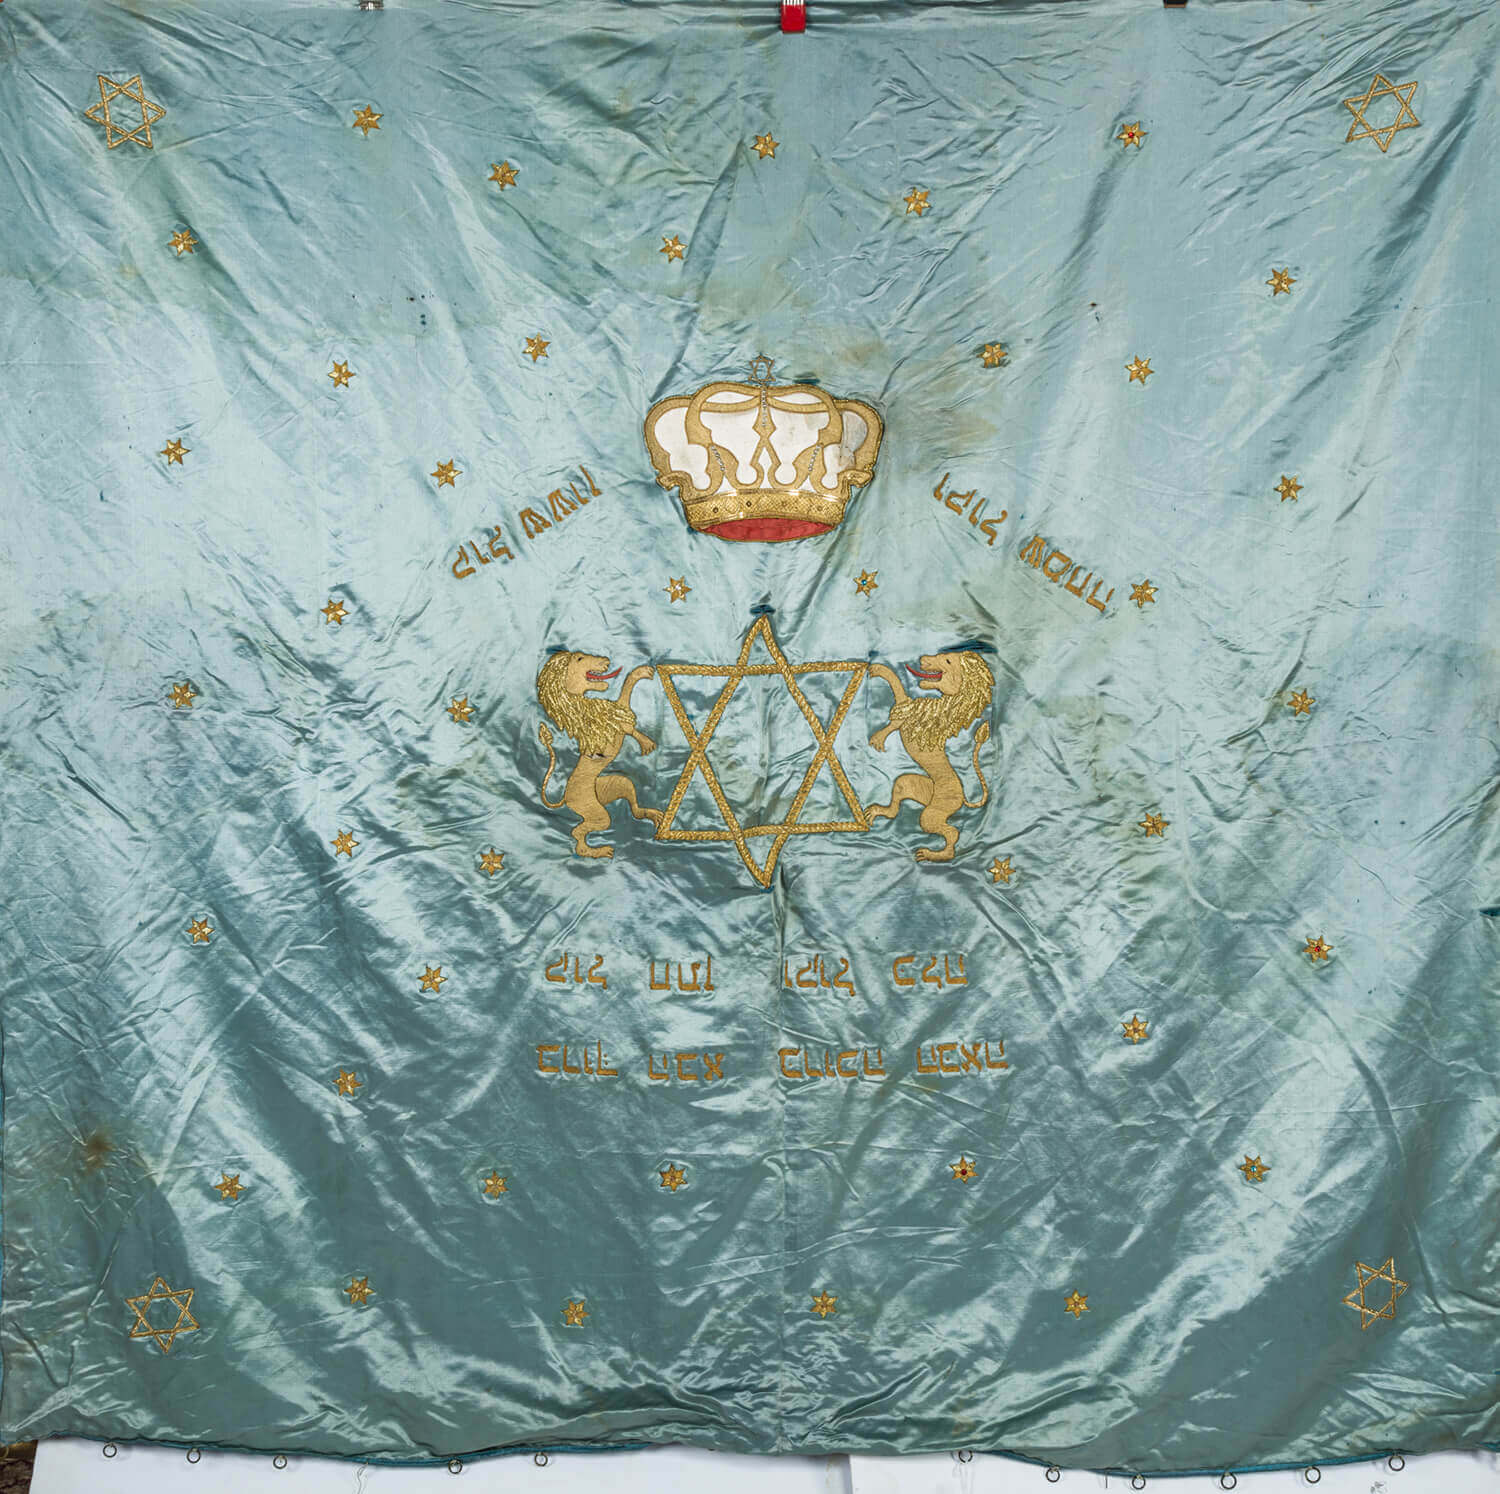 023. A LARGE EMBROIDERED CHUPPAH